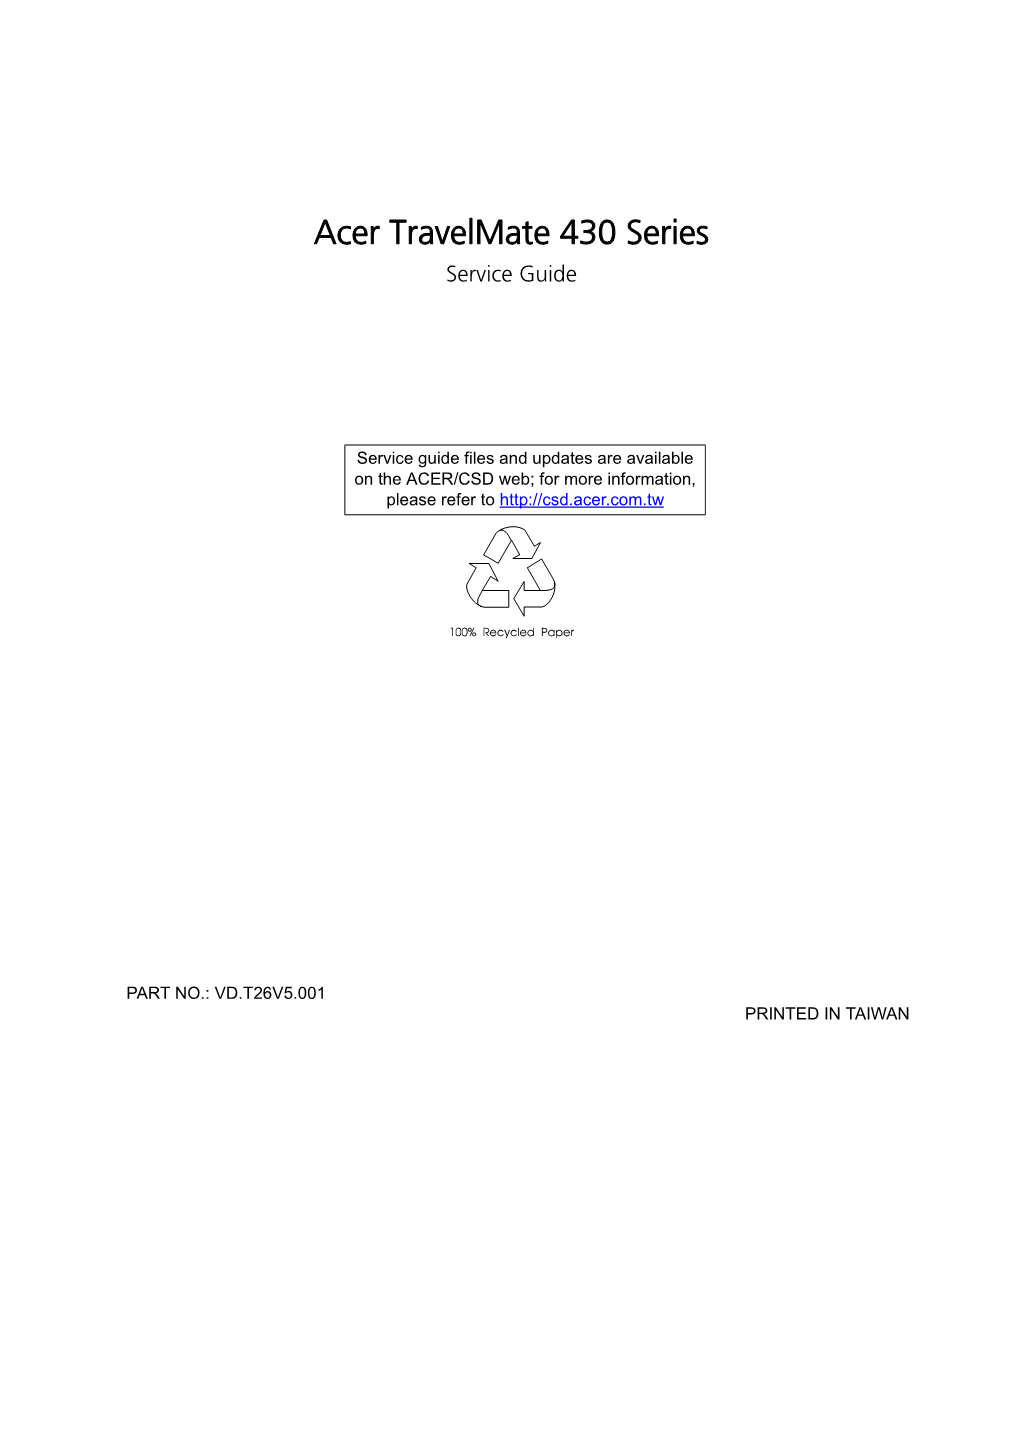 Acer Travelmate 430 Series Service Guide